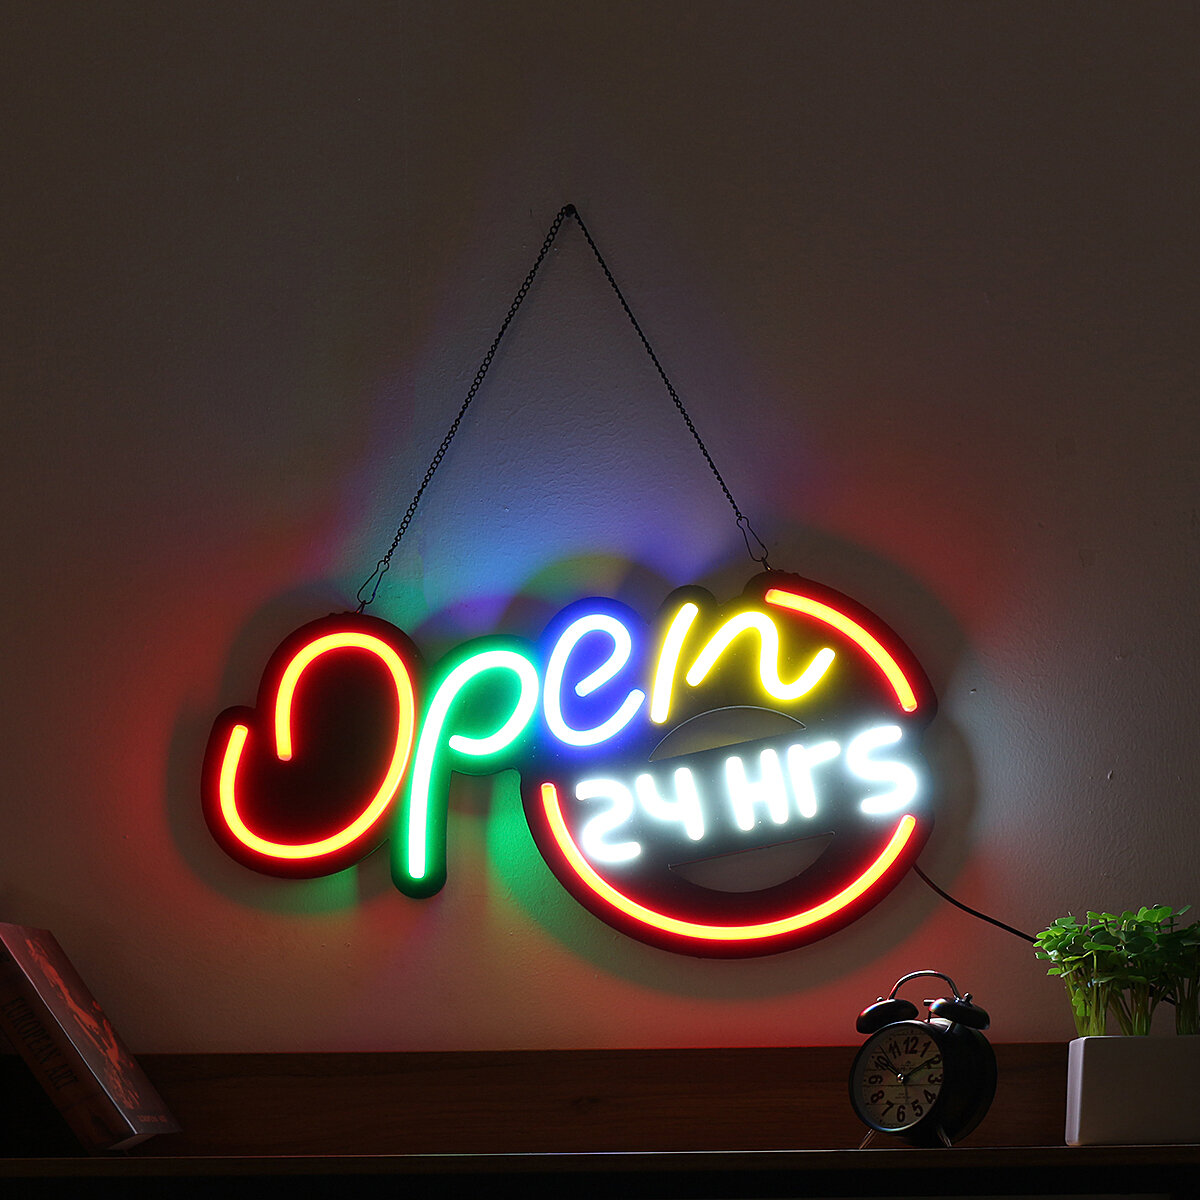 

60x34cm Open 24Hrs Sign LED Neon Light Display Cafe Bar Club Wall Advertising Lamp Decor 110-240V